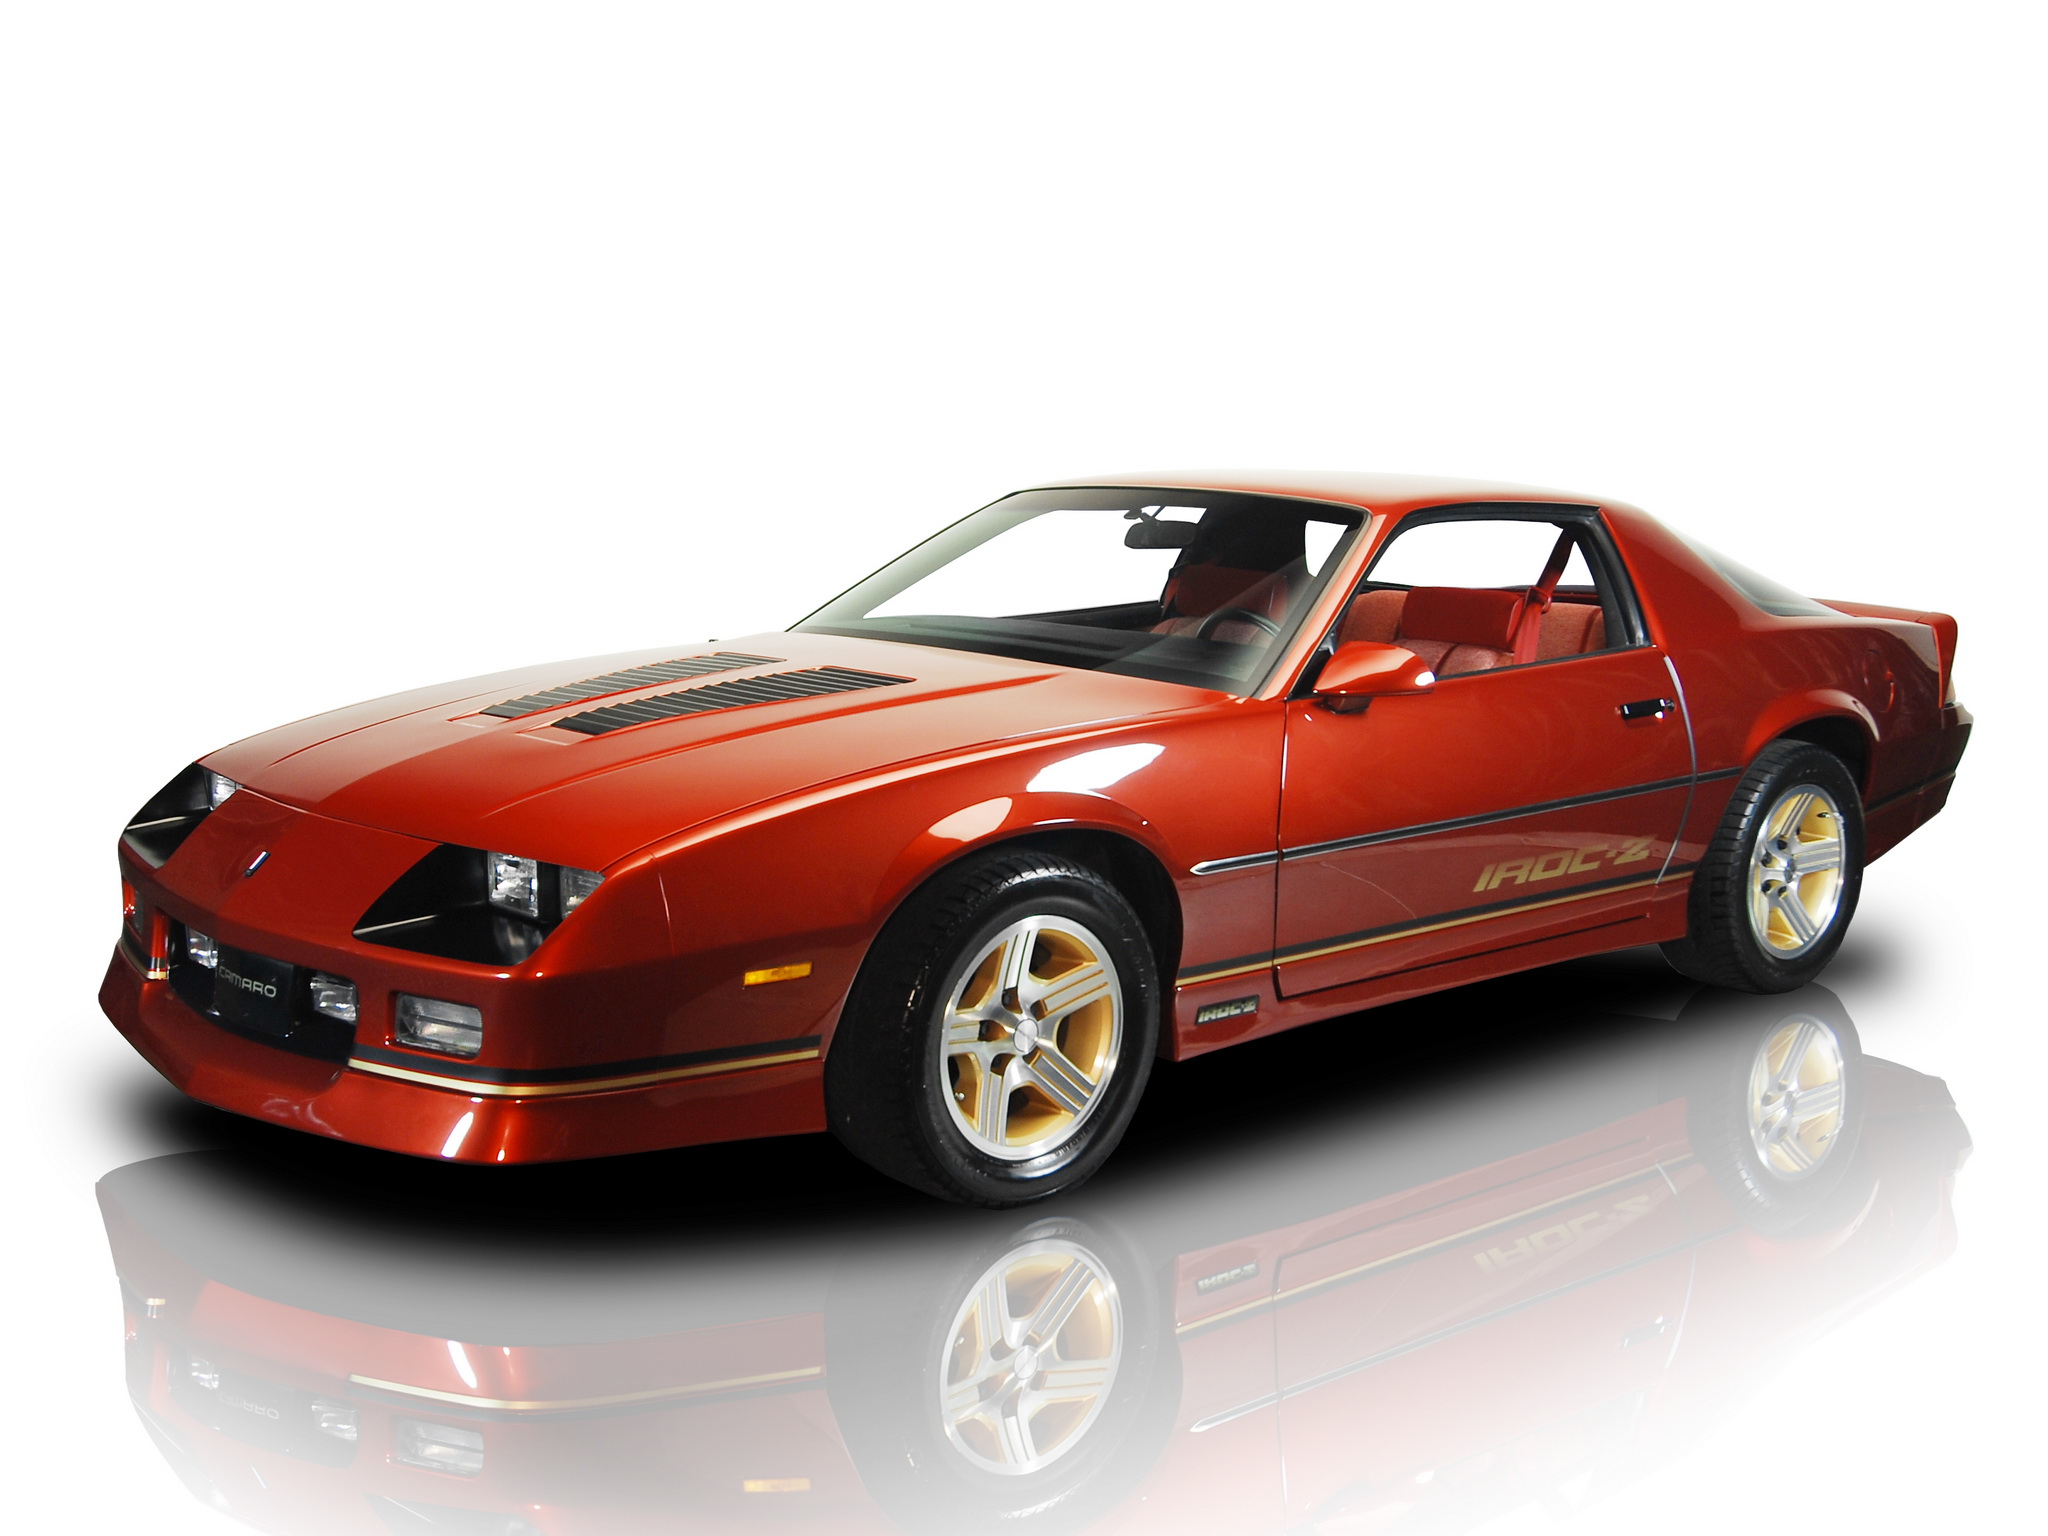 Free download Wallpapers Chevrolet Camaro Z28 IROC Z 1985 1990 Wallpapers  [2048x1536] for your Desktop, Mobile & Tablet | Explore 77+ Camaro Z28  Wallpaper | Camaro Wallpapers, 1969 Camaro Wallpaper, Camaro Ss Wallpaper